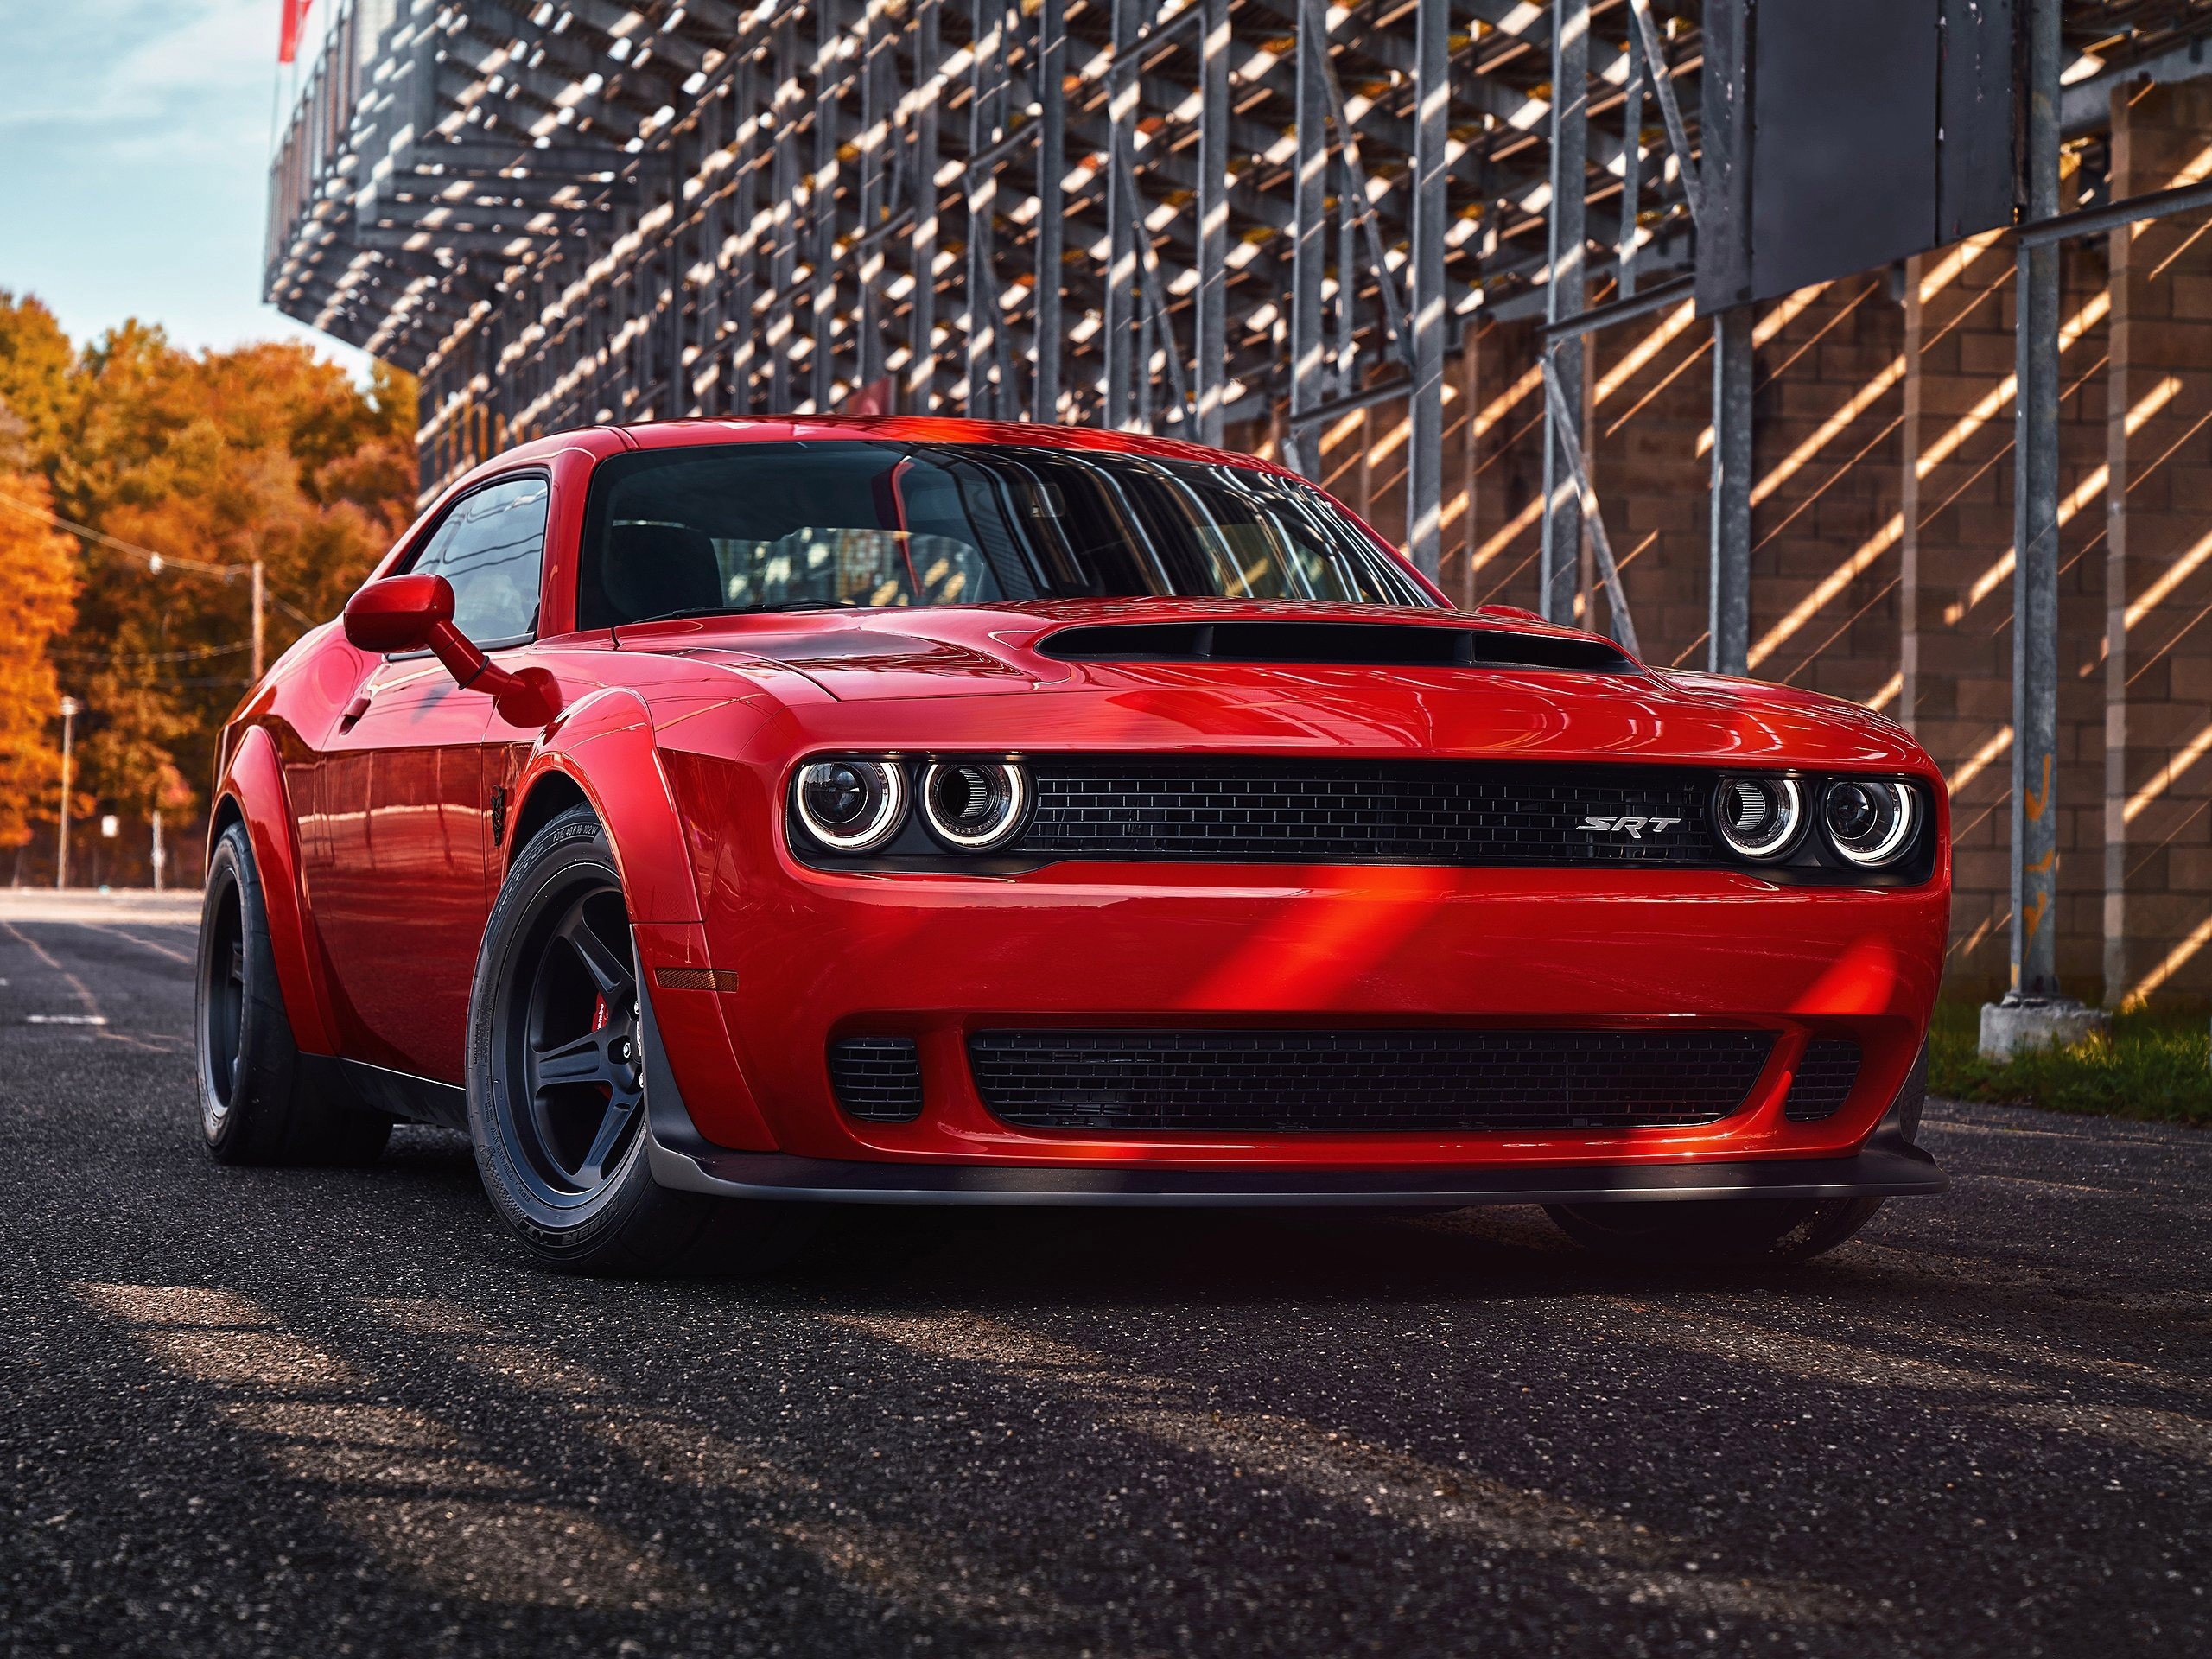 HD Wallpaper for theme: Dodge Challenger HD wallpaper, background